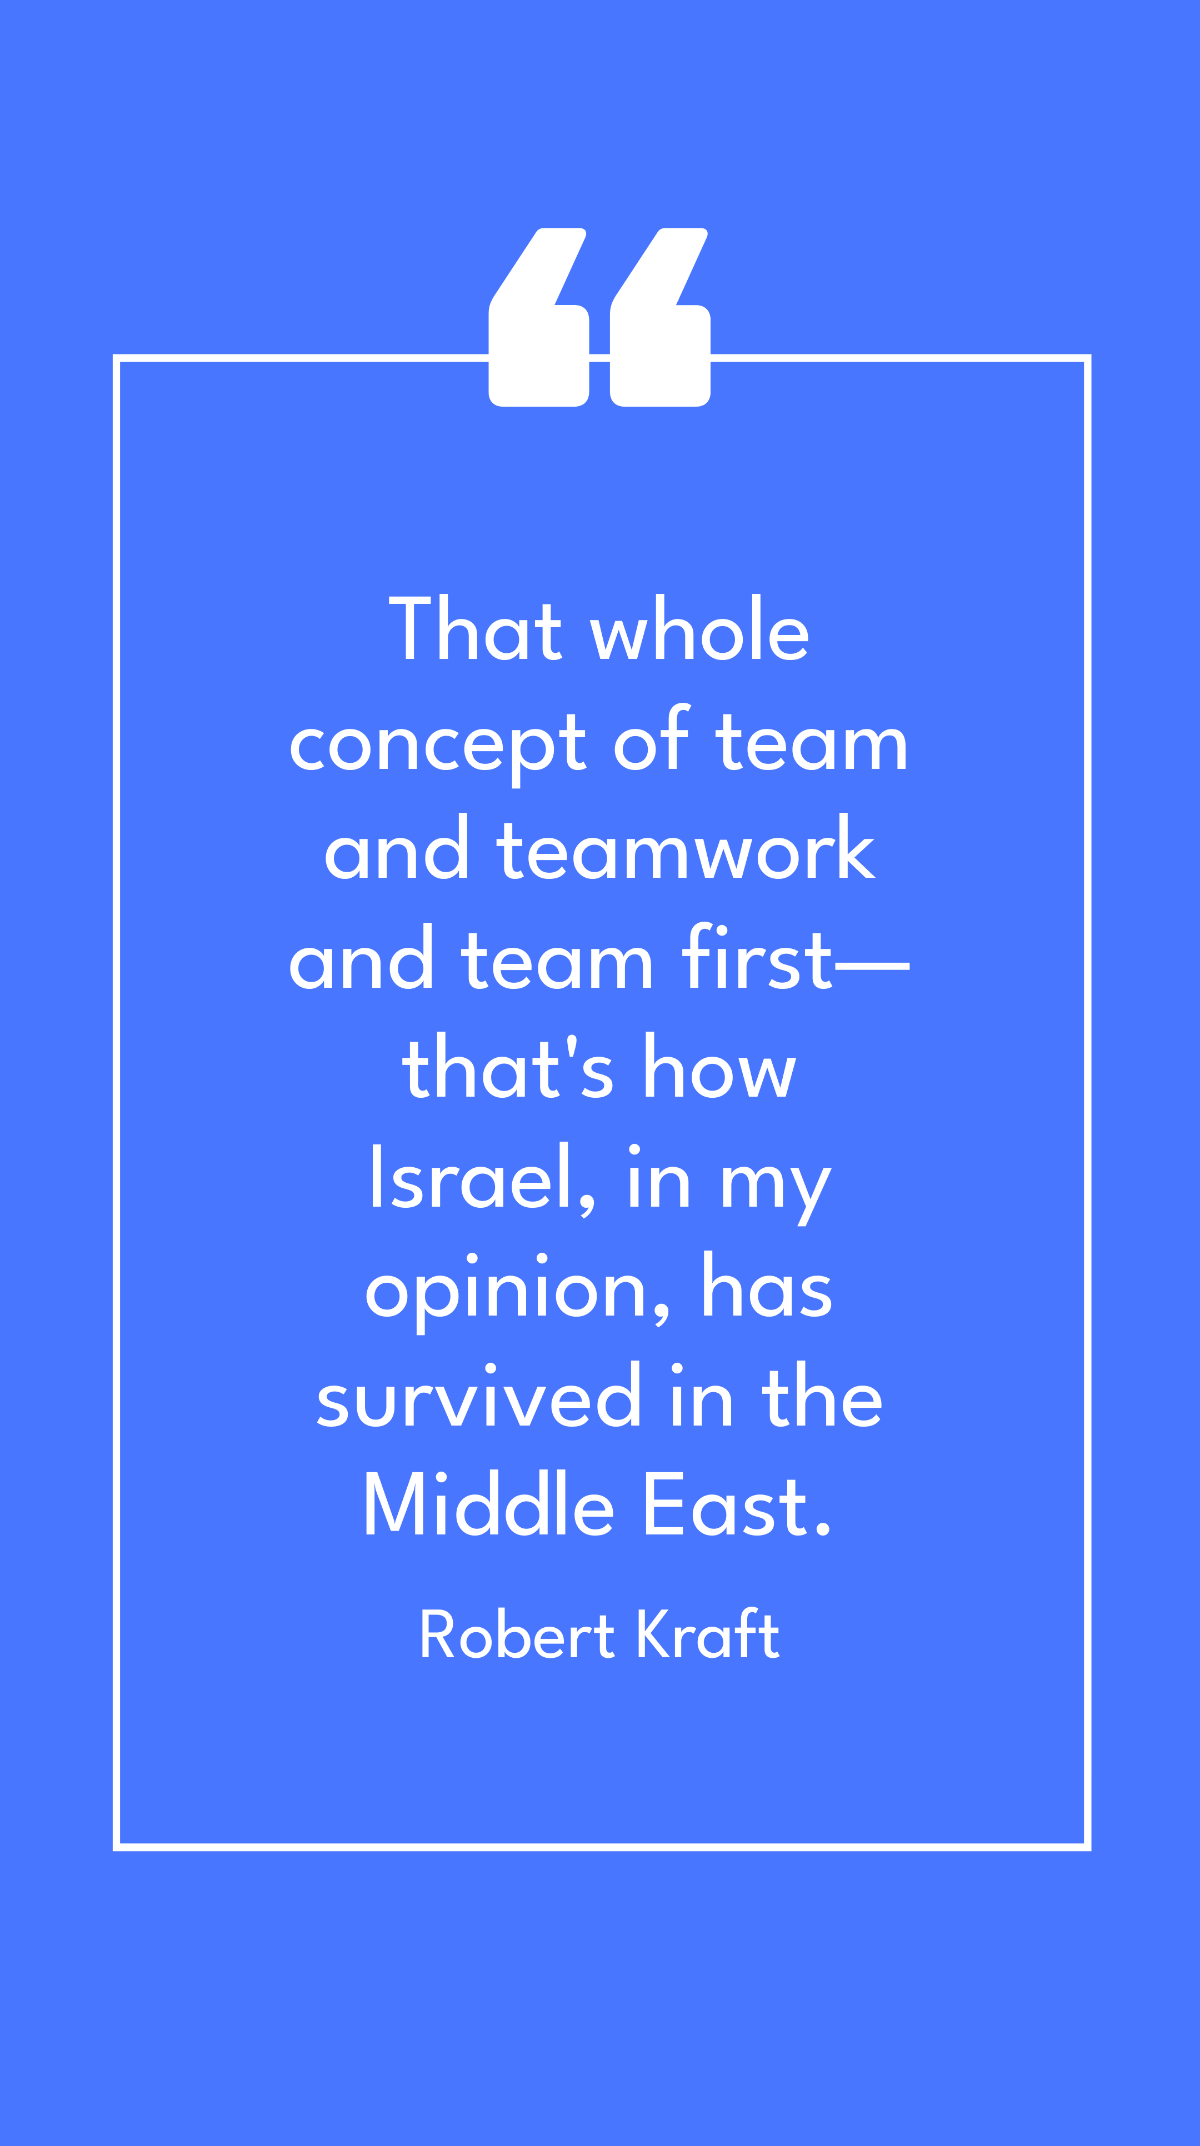 Free Robert Kraft - That whole concept of team and teamwork and team first - that's how Israel, in my opinion, has survived in the Middle East. Template